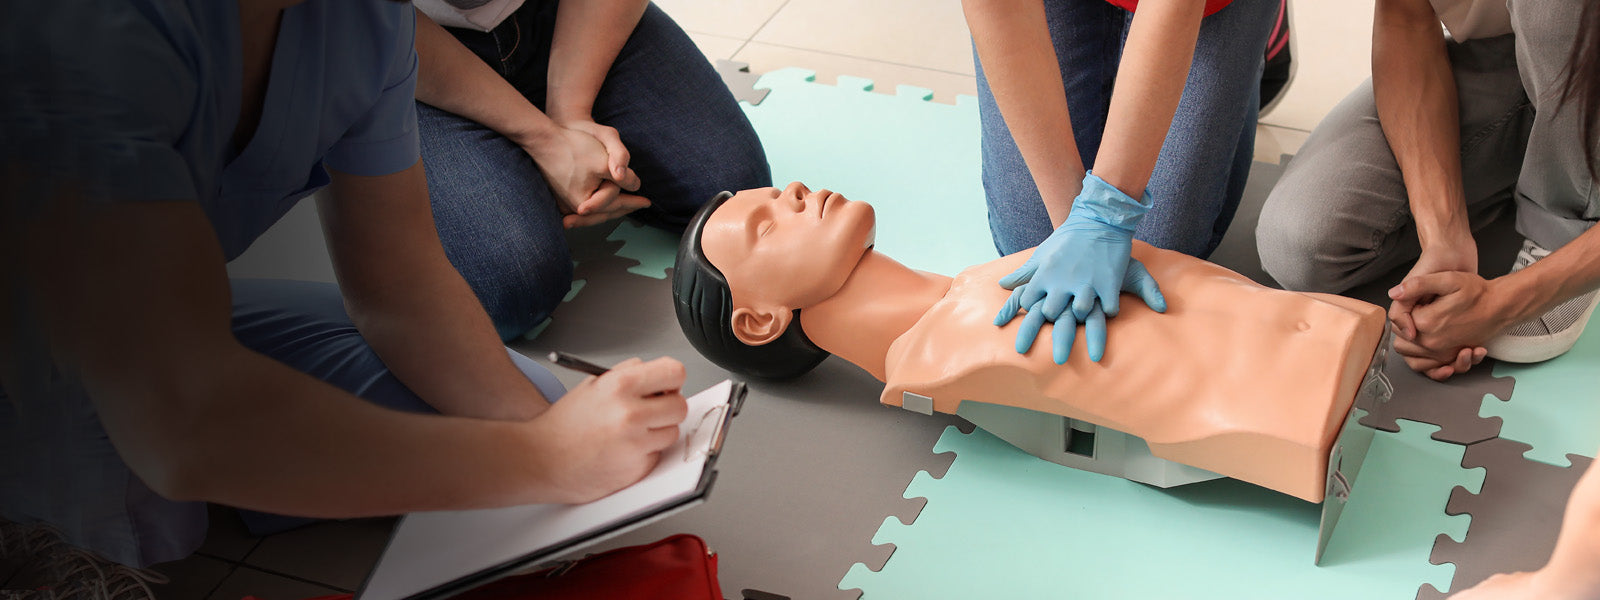 Image of First Aid training